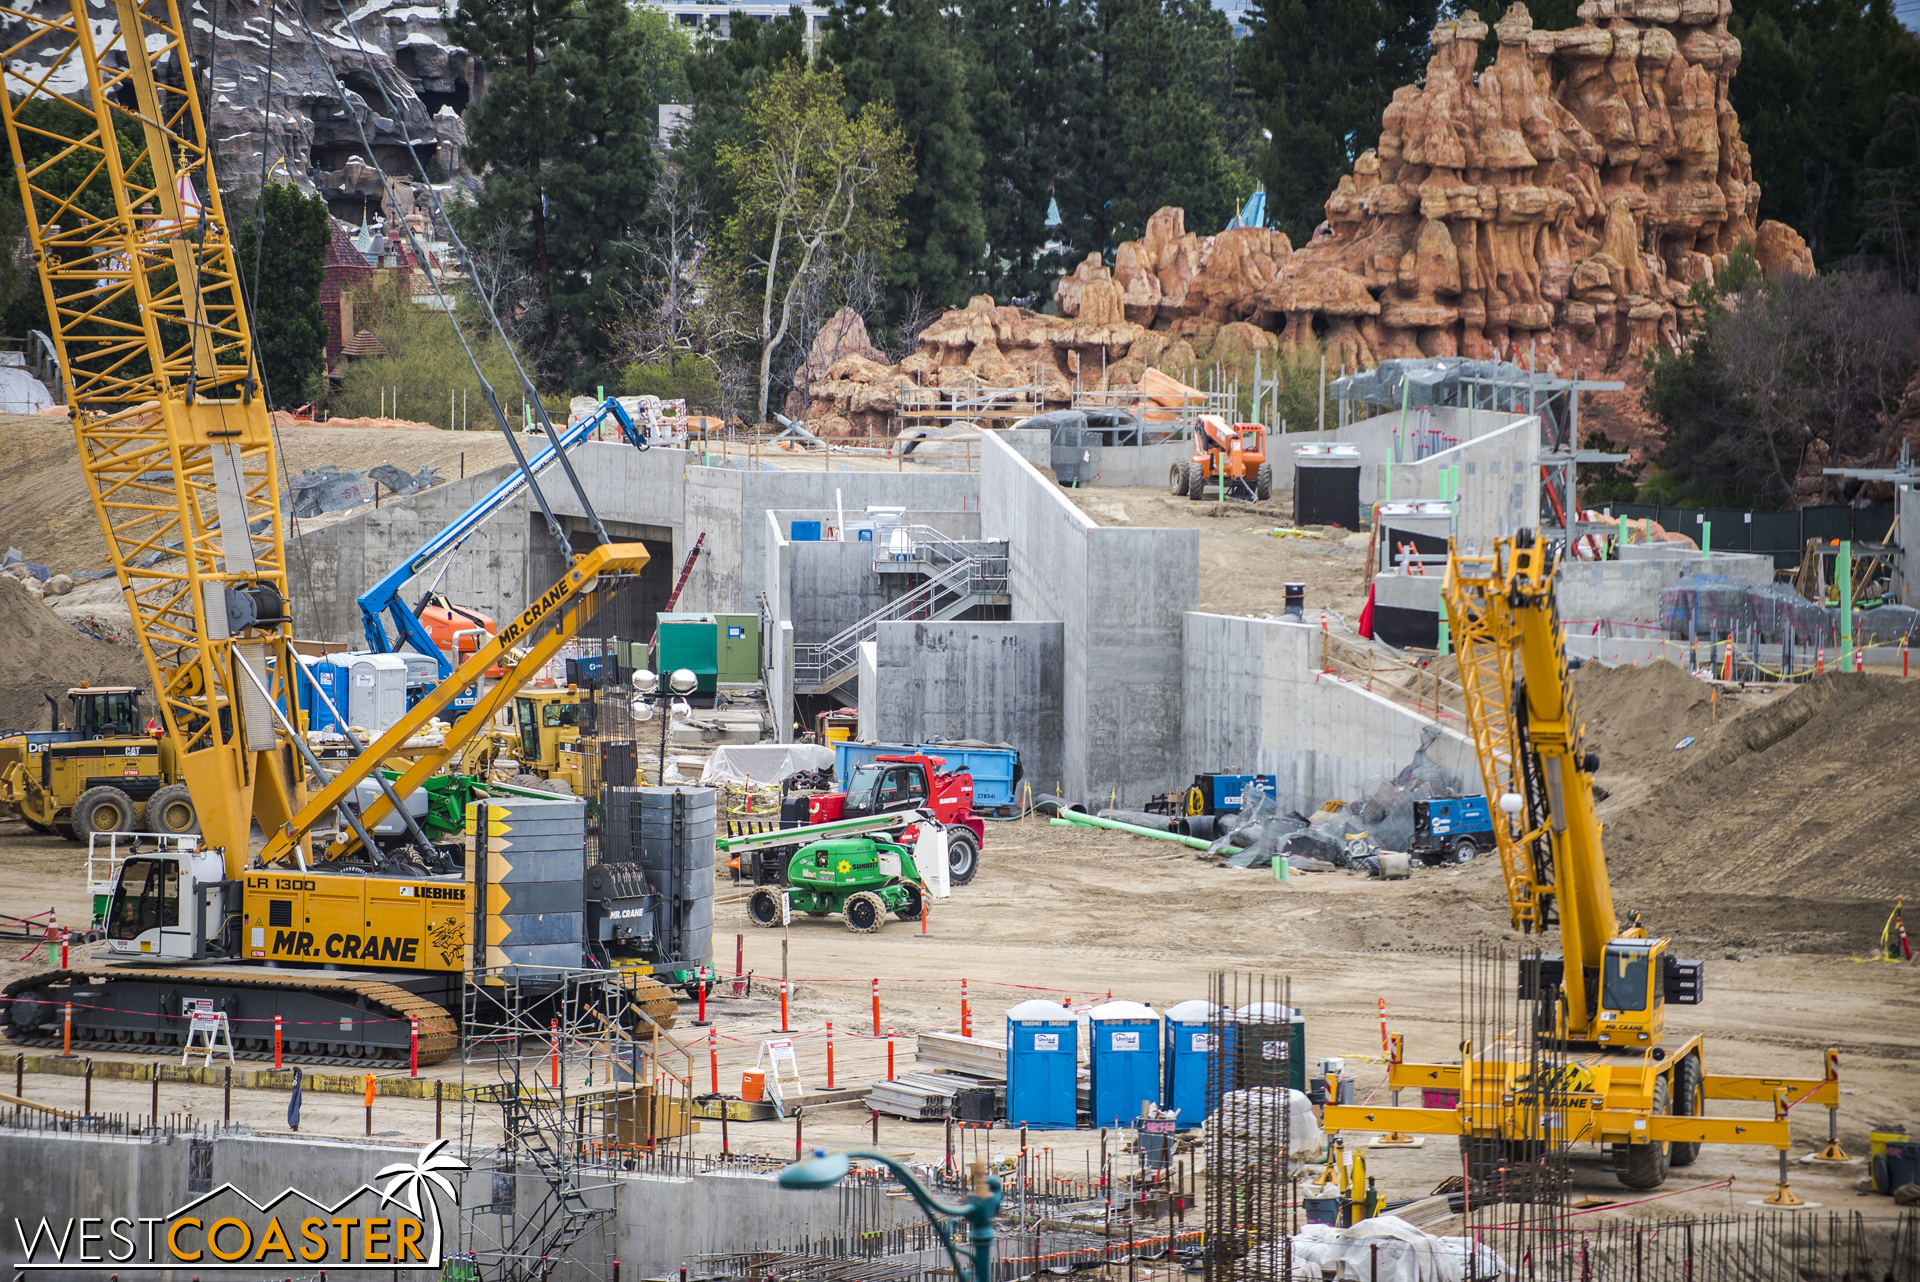  Some stairs have sprung up along the concrete retaining walls supporting the berm and service drive over the future "Star Wars" Land main entrance section. 